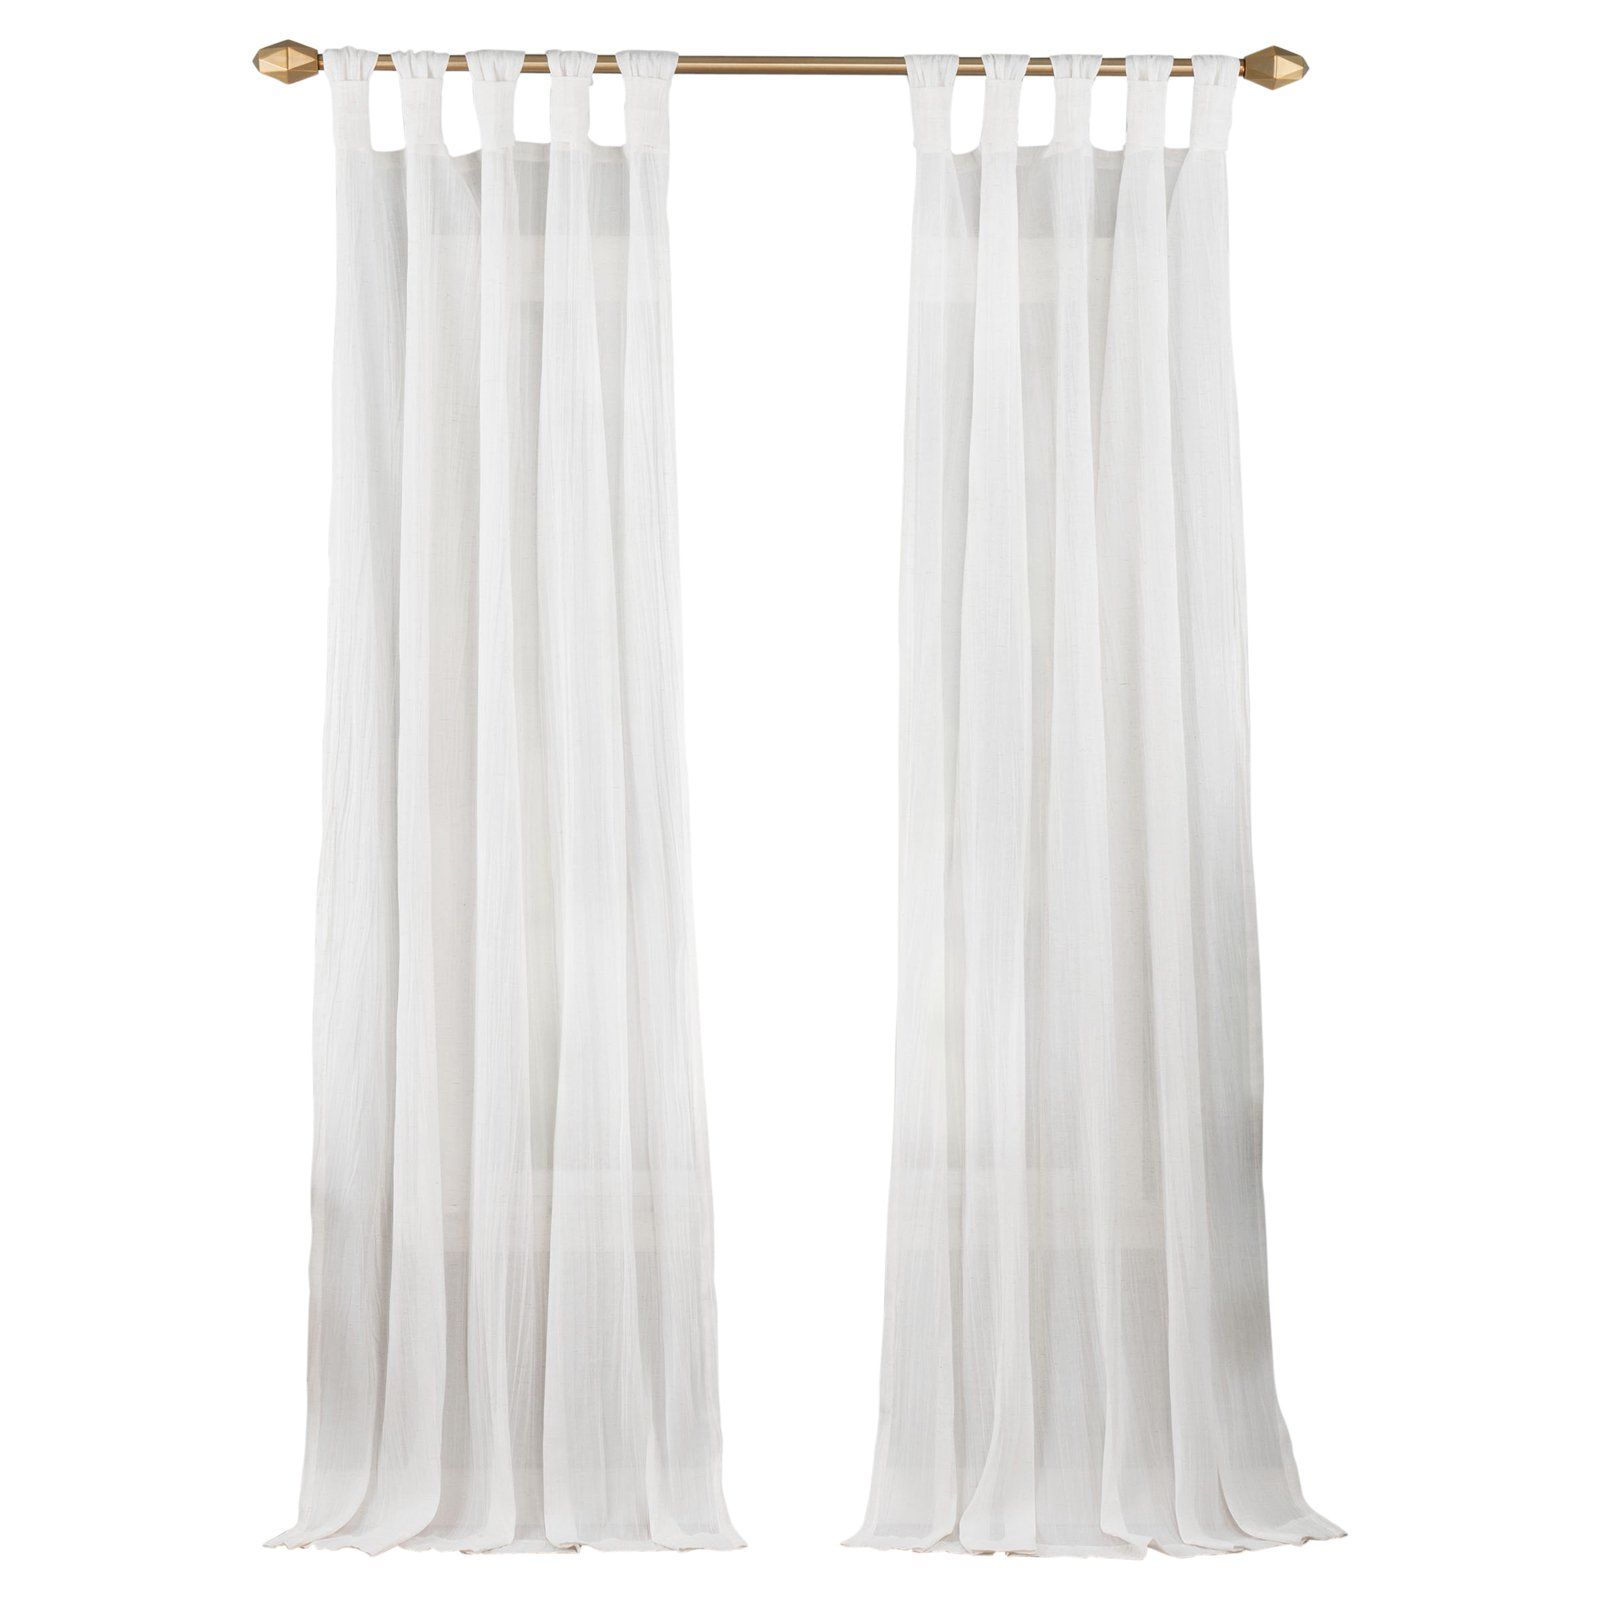 Vue Elements Priya Curtain With Regard To Trendy Vue Elements Priya Tab Top Window Curtains (View 11 of 20)